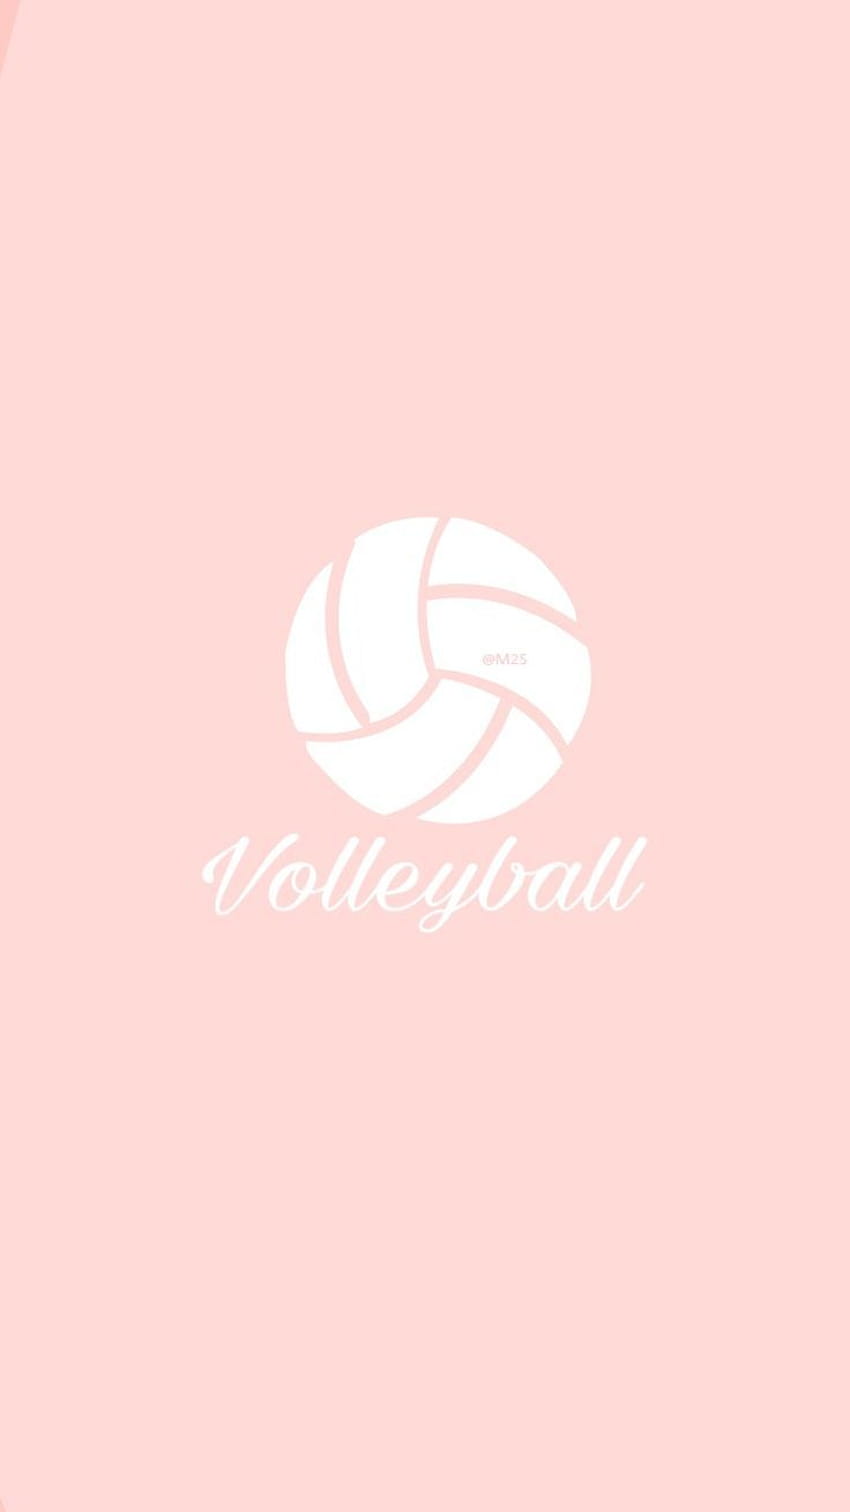 Cute volleyball quotes tumblr Athletic aesthetic tumblr ...